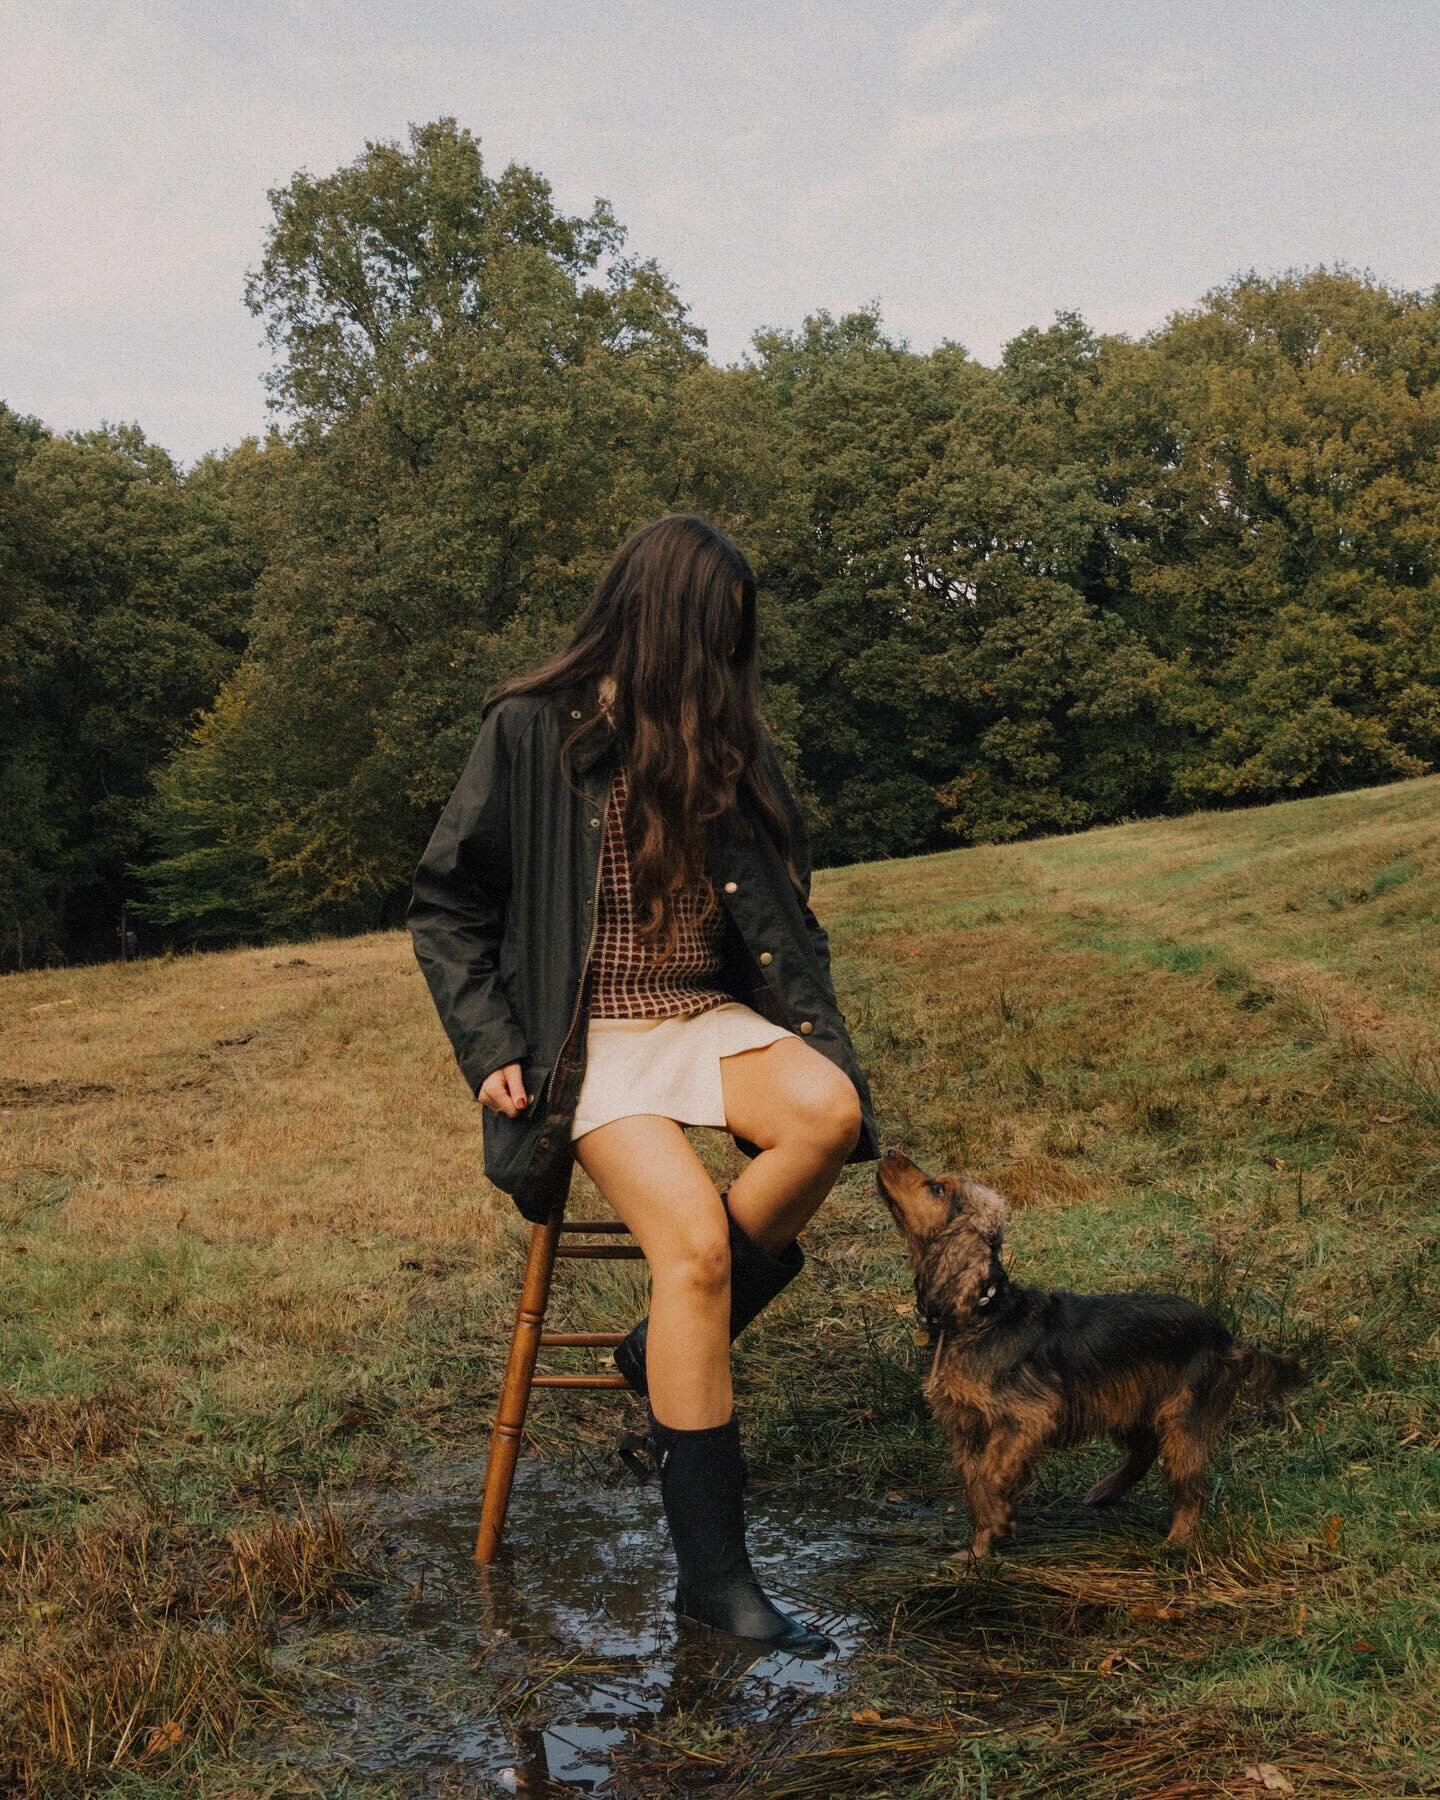 Countryside core eat your heart out 🪷🌾🦌

~ stills for @barbour by @beatricerigby

#countrysidelife #countrysideaesthetic #cottagecore #cottagecoreaesthetic #cottagecorefashion #barbour #countrysidephotoshoot #photographer